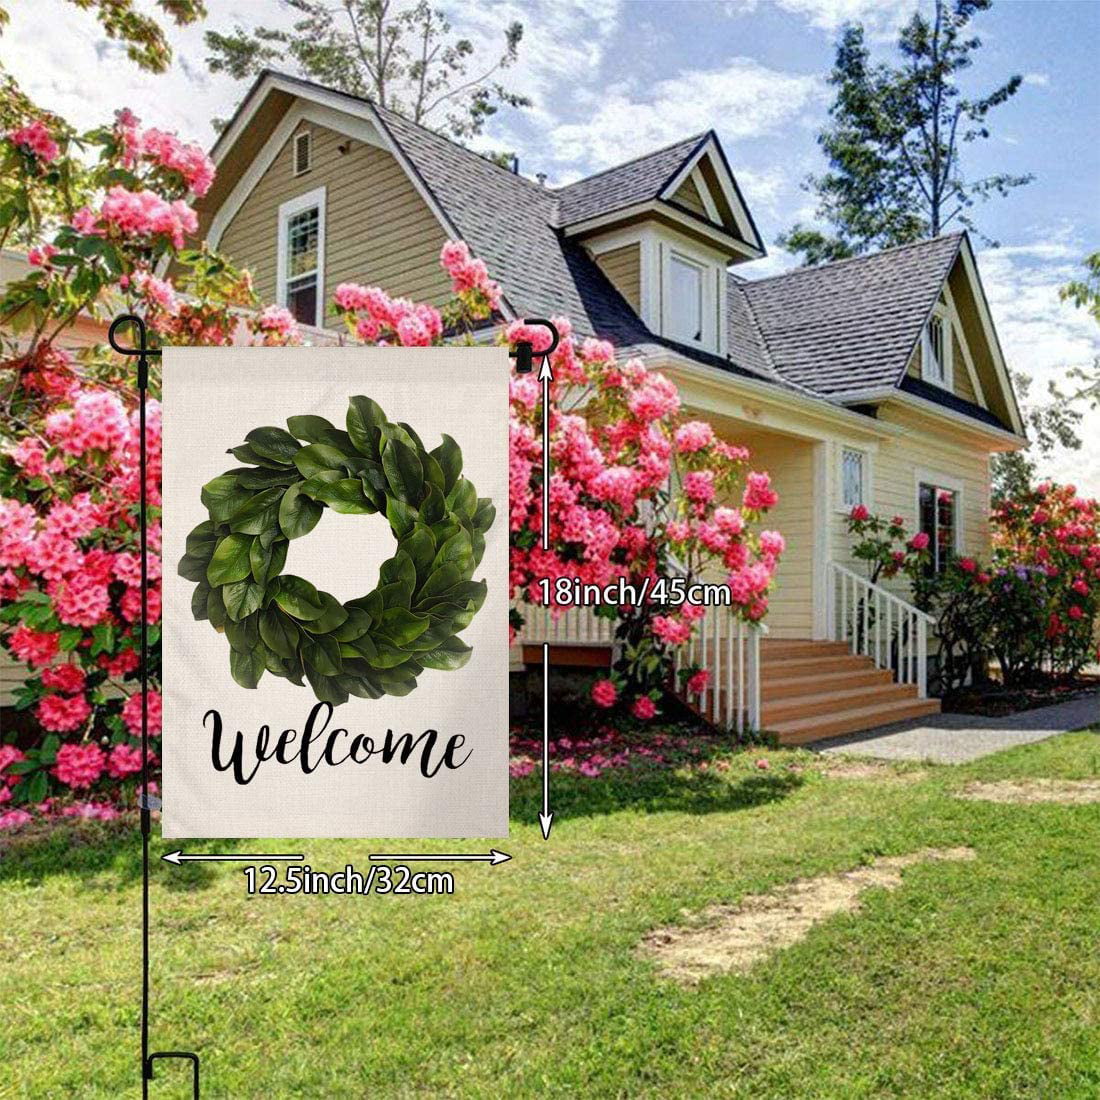 Welcome Magnolia Spring Wreath Small Garden Flag Vertical Double Sided 12.5 x 18